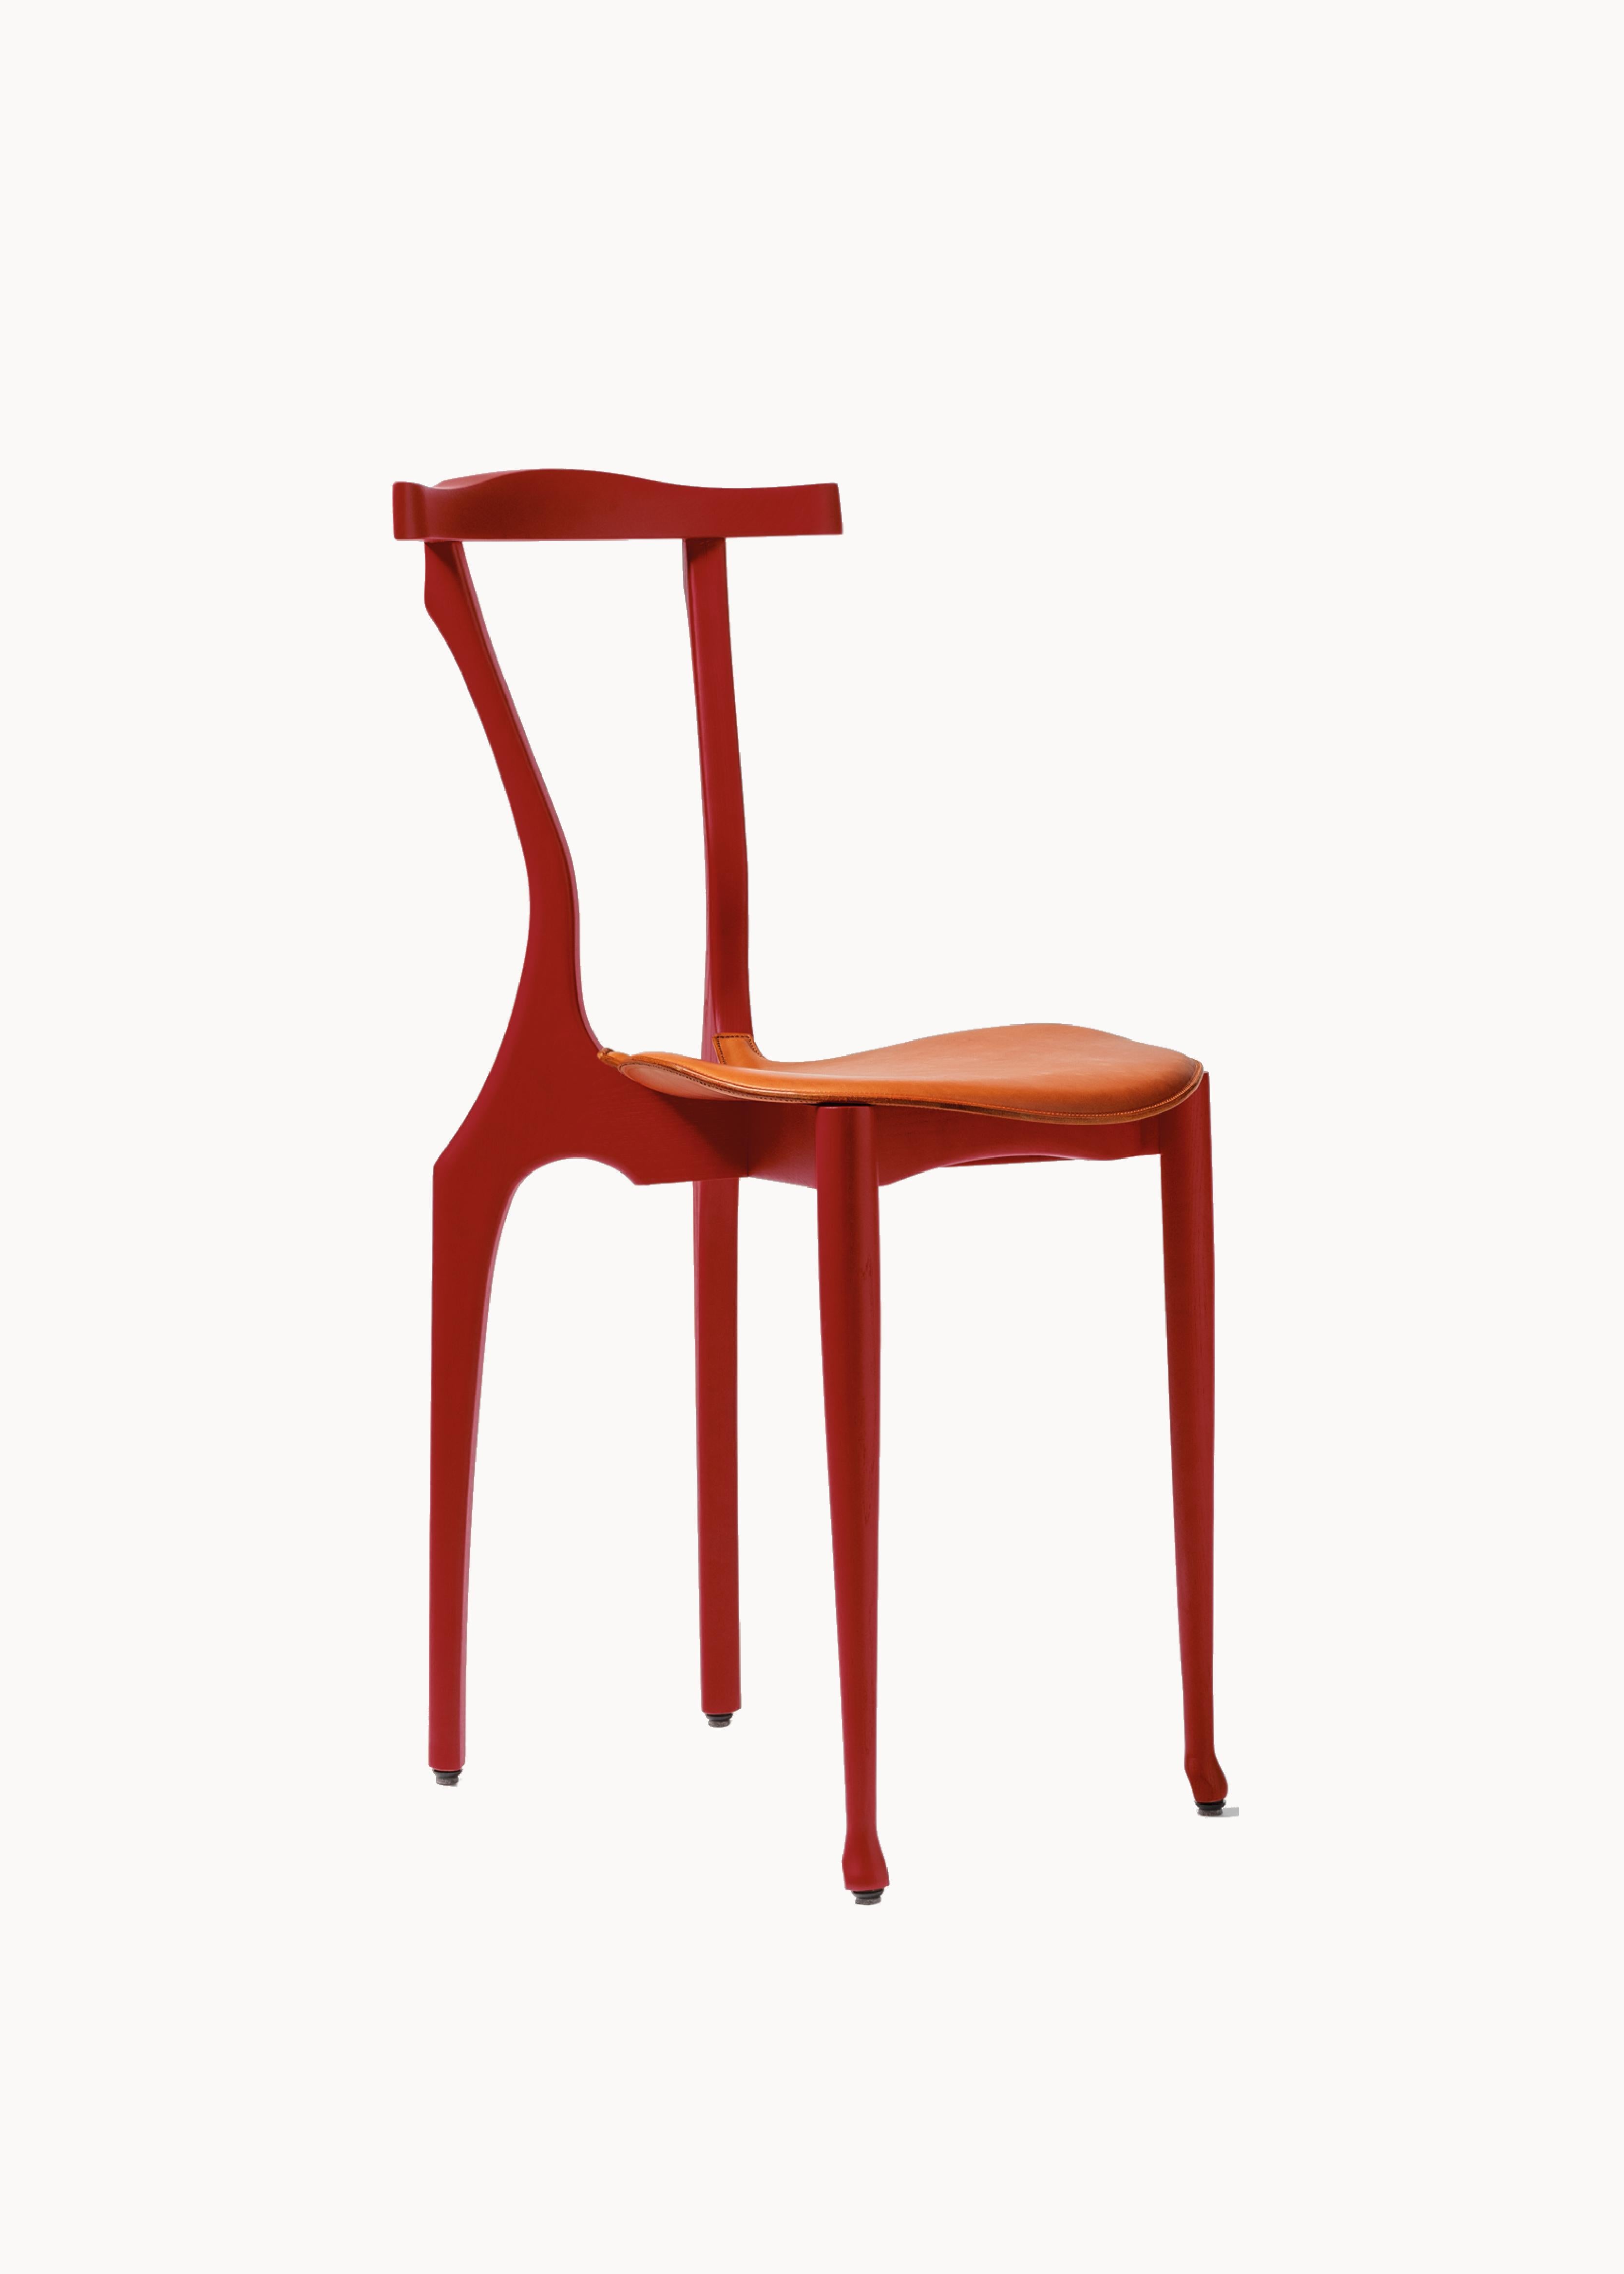 Gaulinetta dining chair by Oscar Tusquets red Lacquered Ash wood, contemporary  For Sale 4